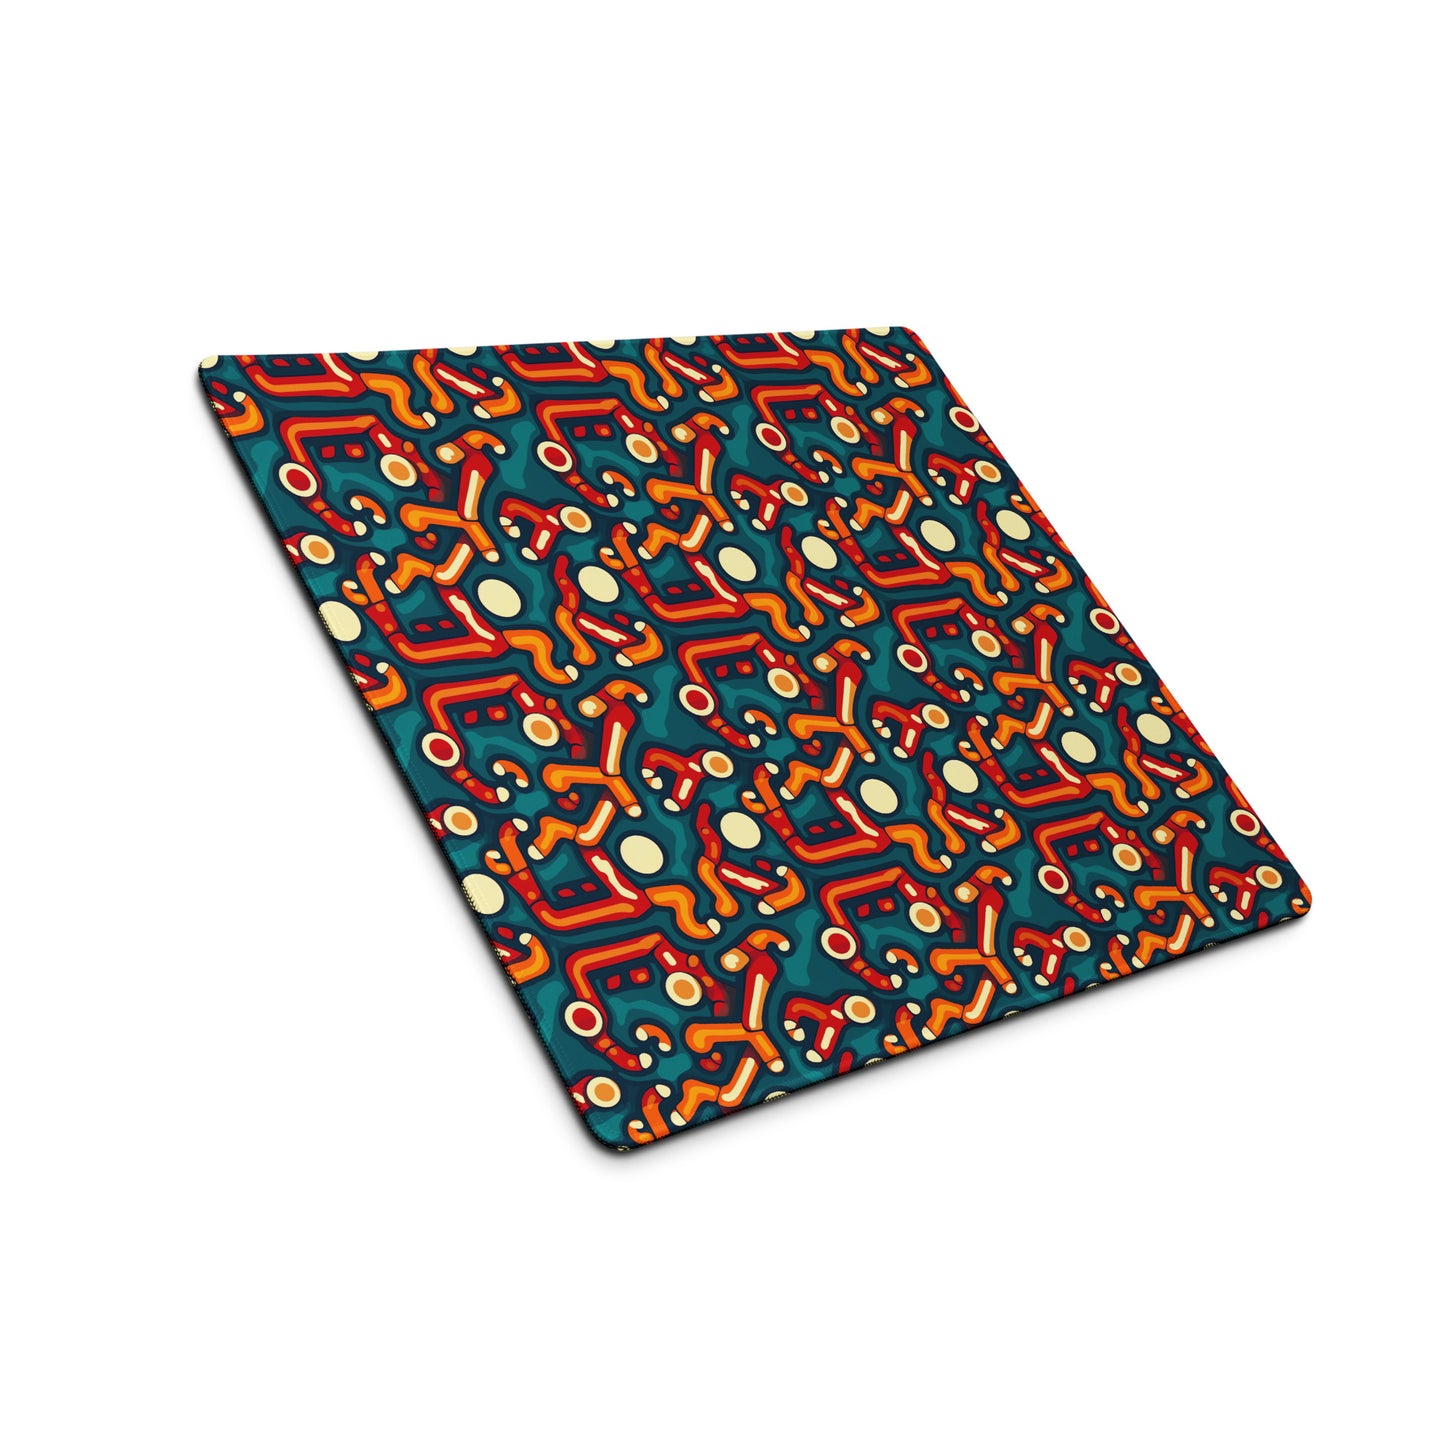 A 18" x 16" desk pad with abstract line art on it shown at an angle. Red, Orange and Teal in color.